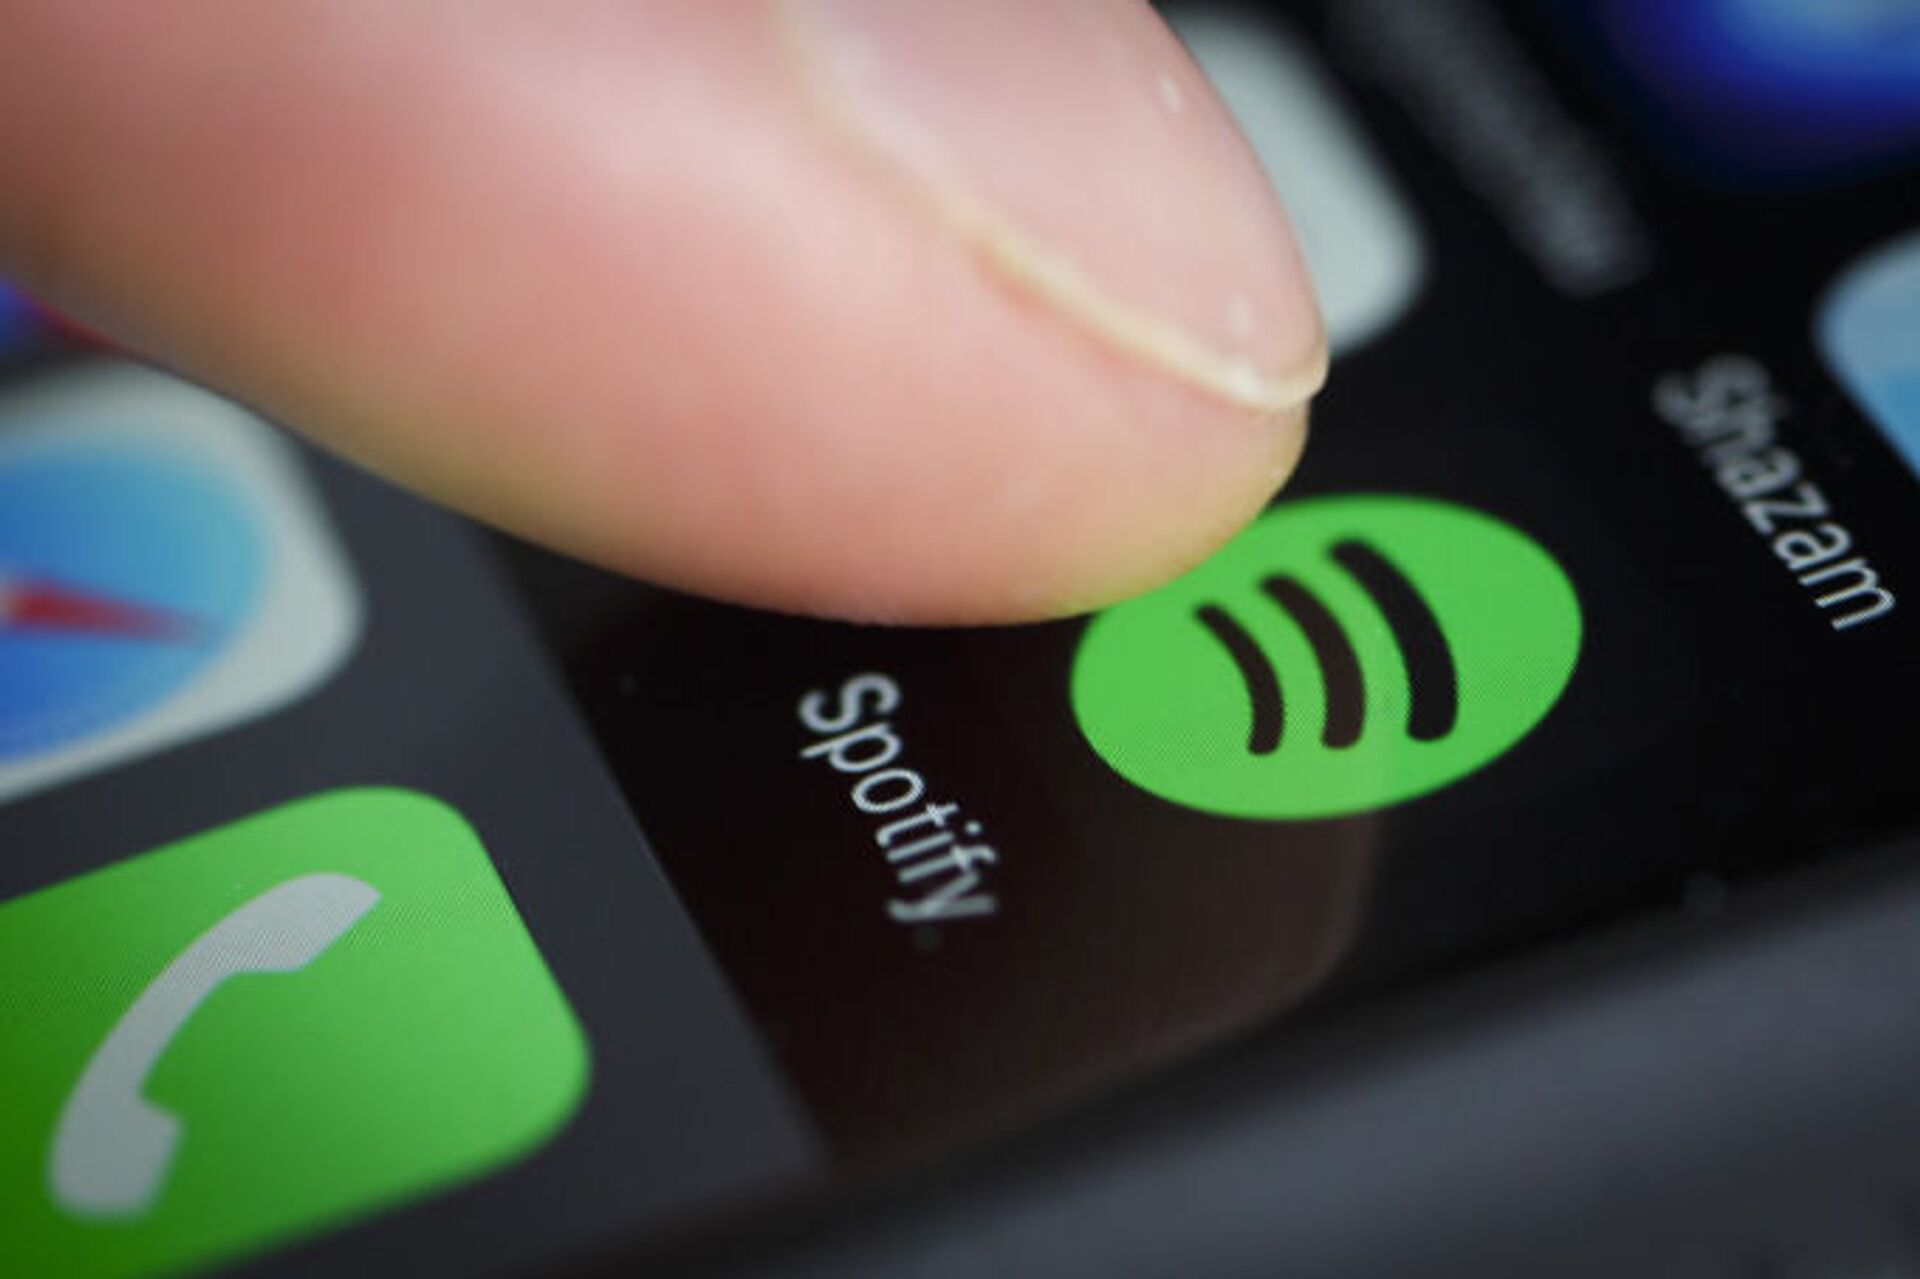 The Logo of streeming service Spotify is displayed on the screen of a smartphone on January 21, 2016 in Berlin, Germany - Sputnik International, 1920, 06.04.2022